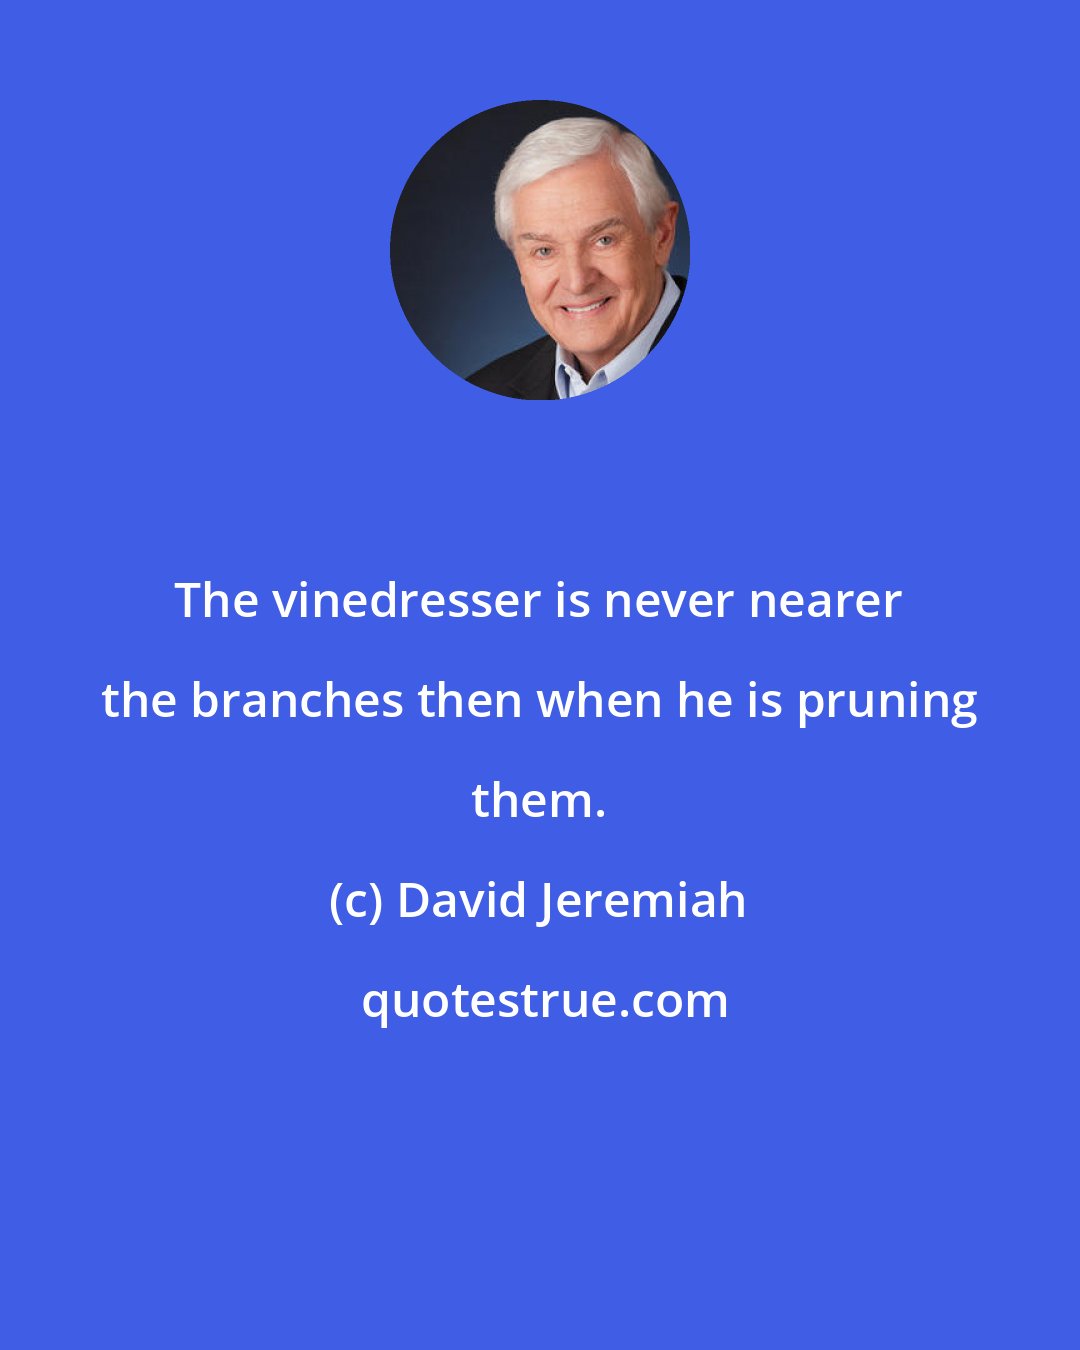 David Jeremiah: The vinedresser is never nearer the branches then when he is pruning them.